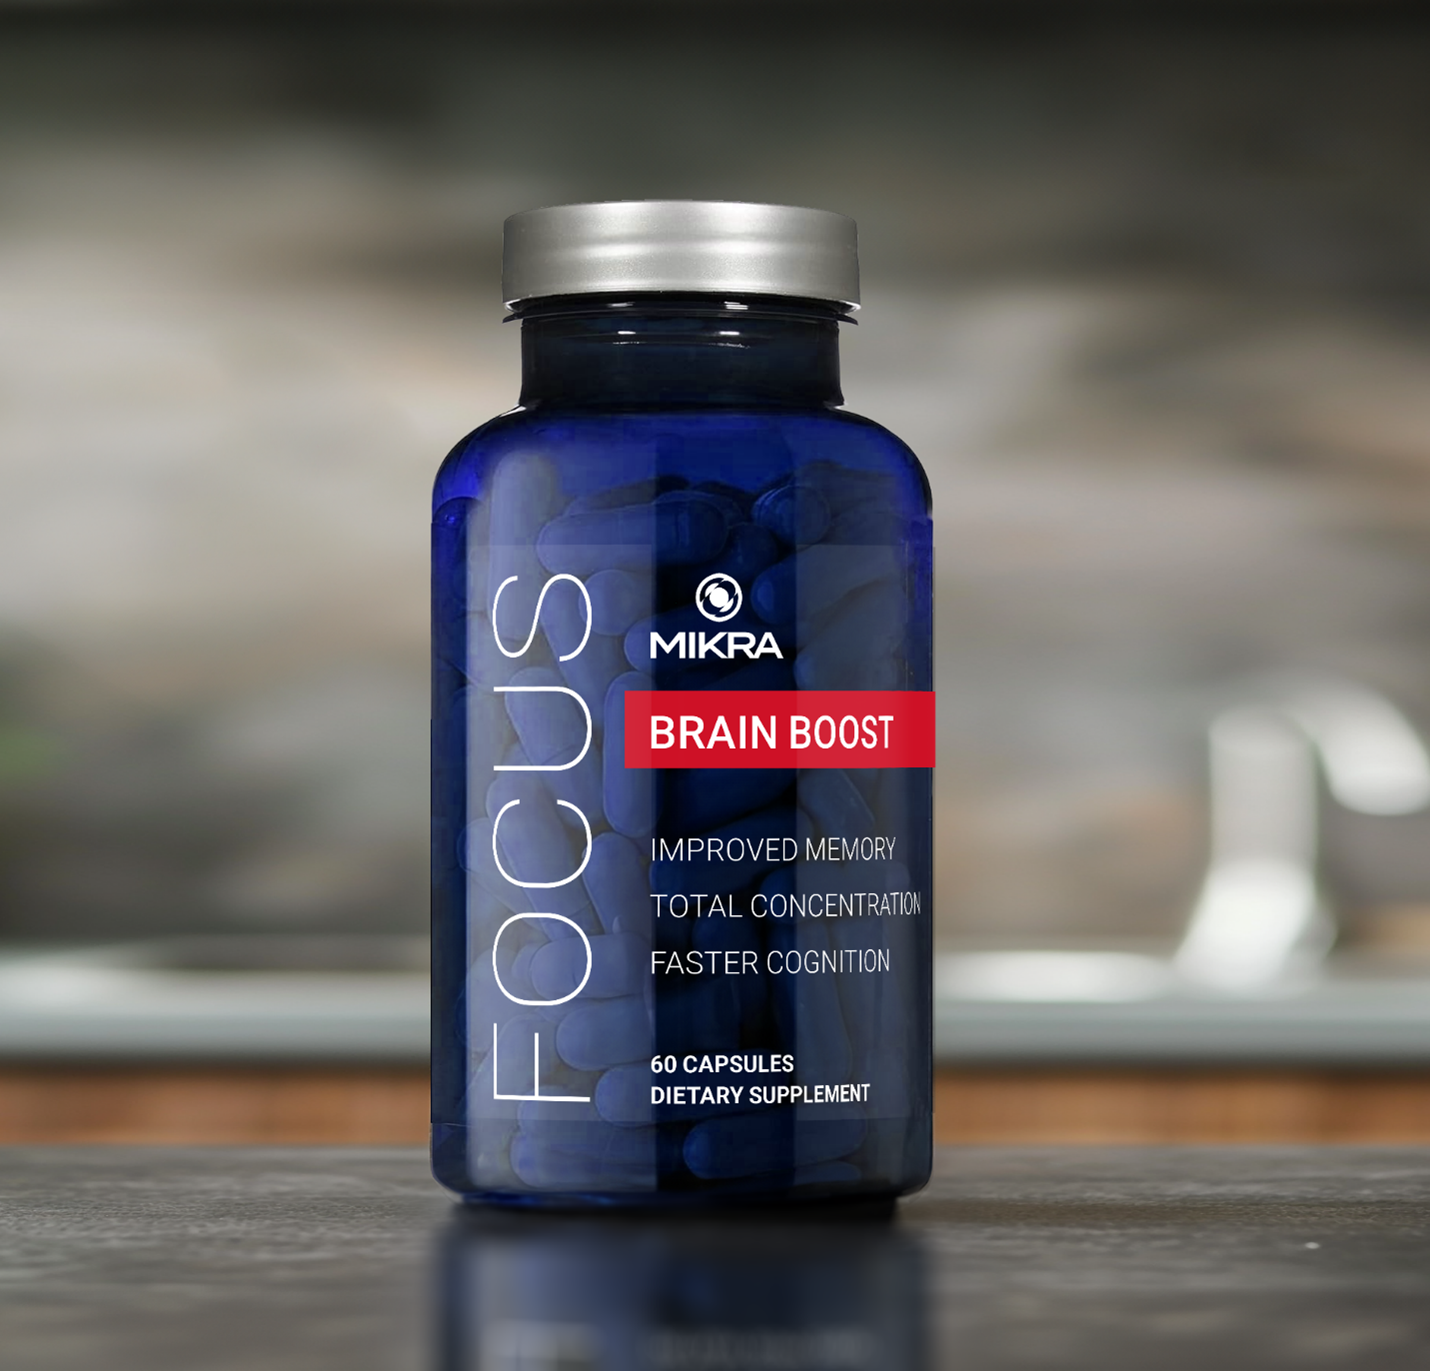 FOCUS combines a precision blend of citicoline, tyrosine and pure lion's mane mushroom to deliver superior clarity of cognition and improved memory.